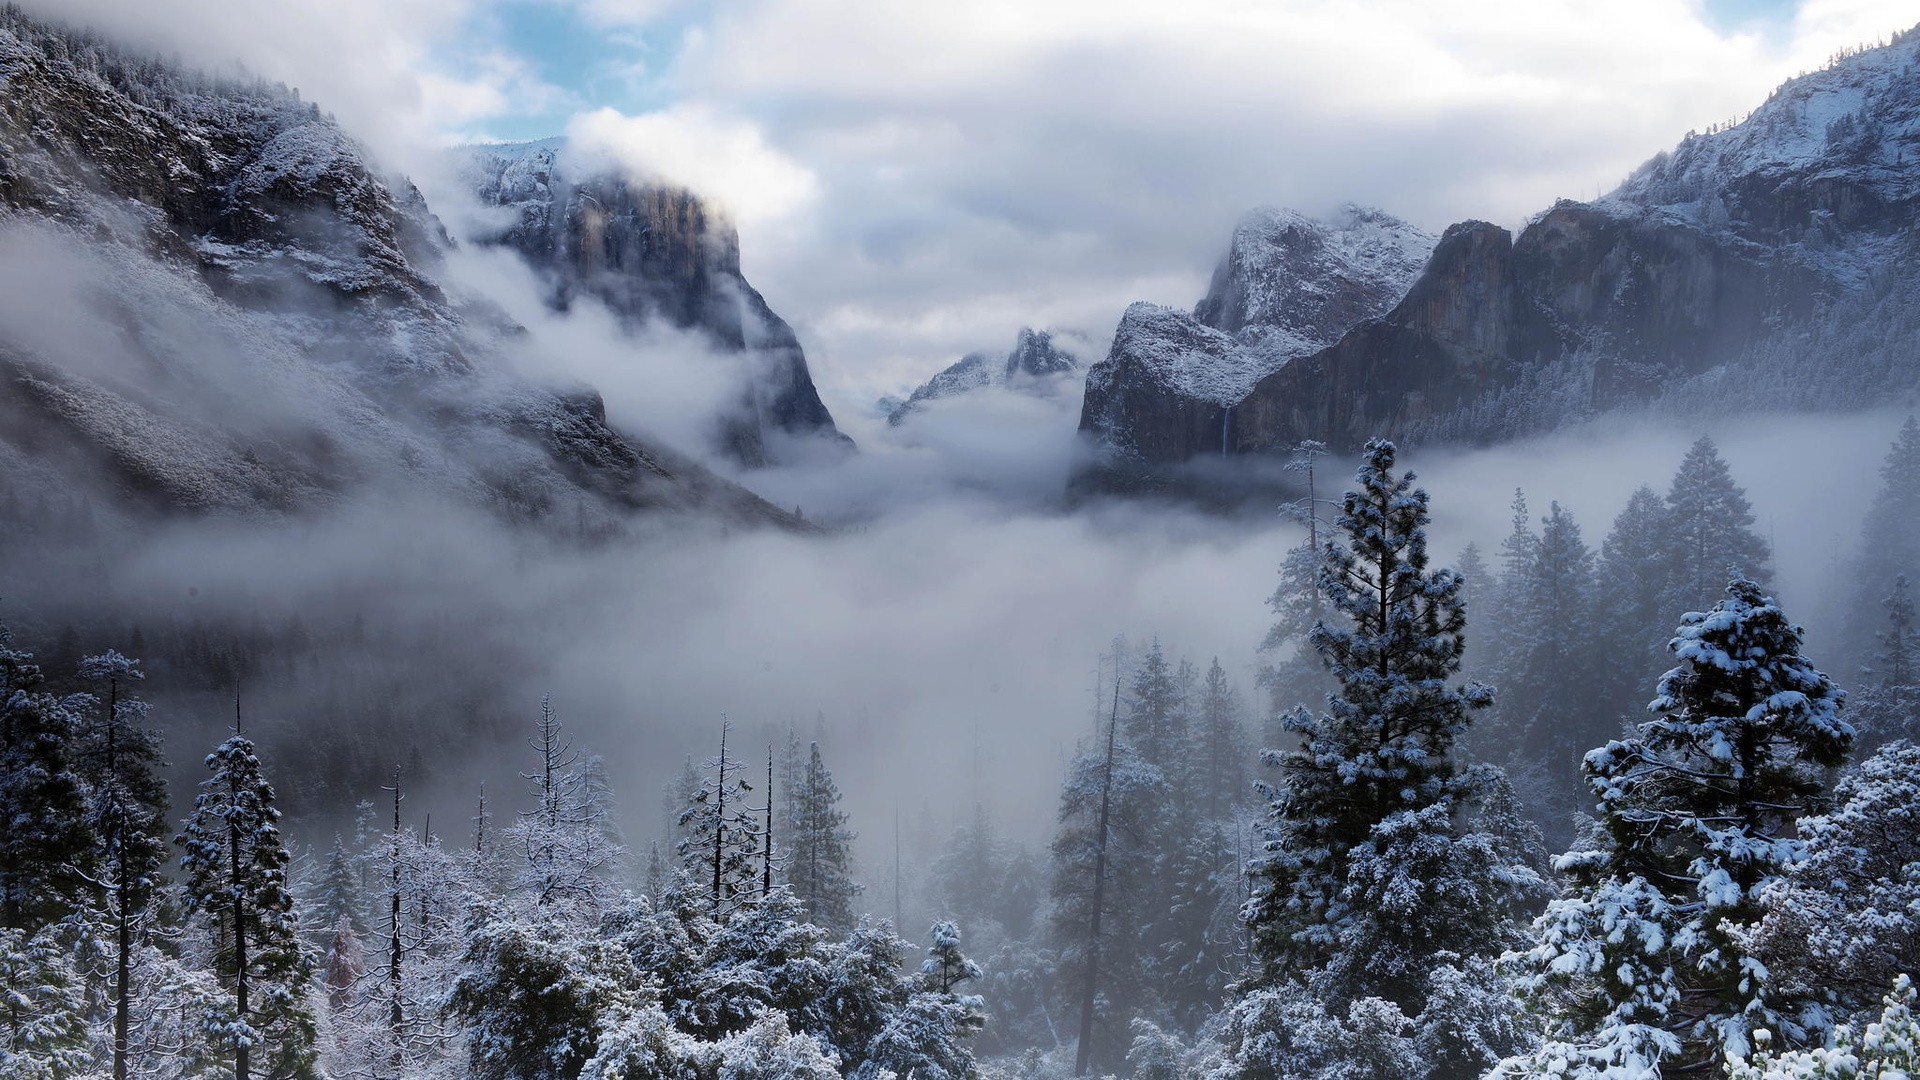 General 1920x1080 landscape nature clouds mountains winter snow Yosemite National Park USA trees cold